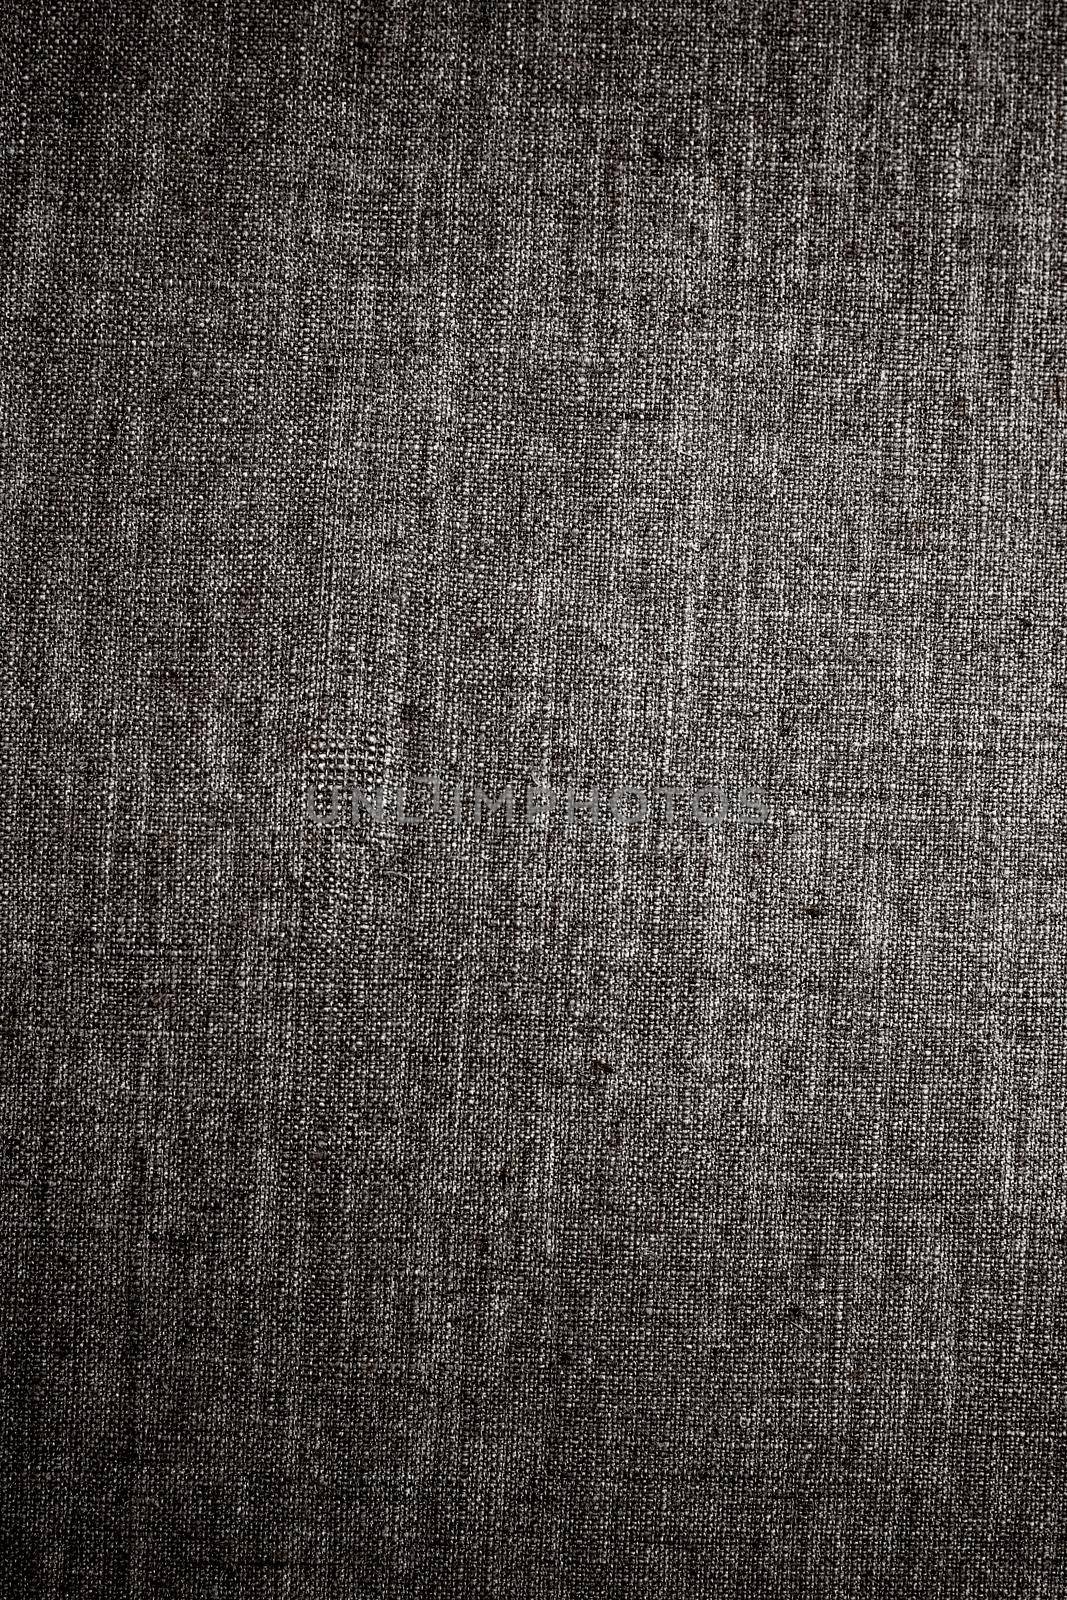 Textile material, natural surface and vintage decor texture concept - Decorative dark linen fabric textured background for interior, furniture design and art canvas backdrop